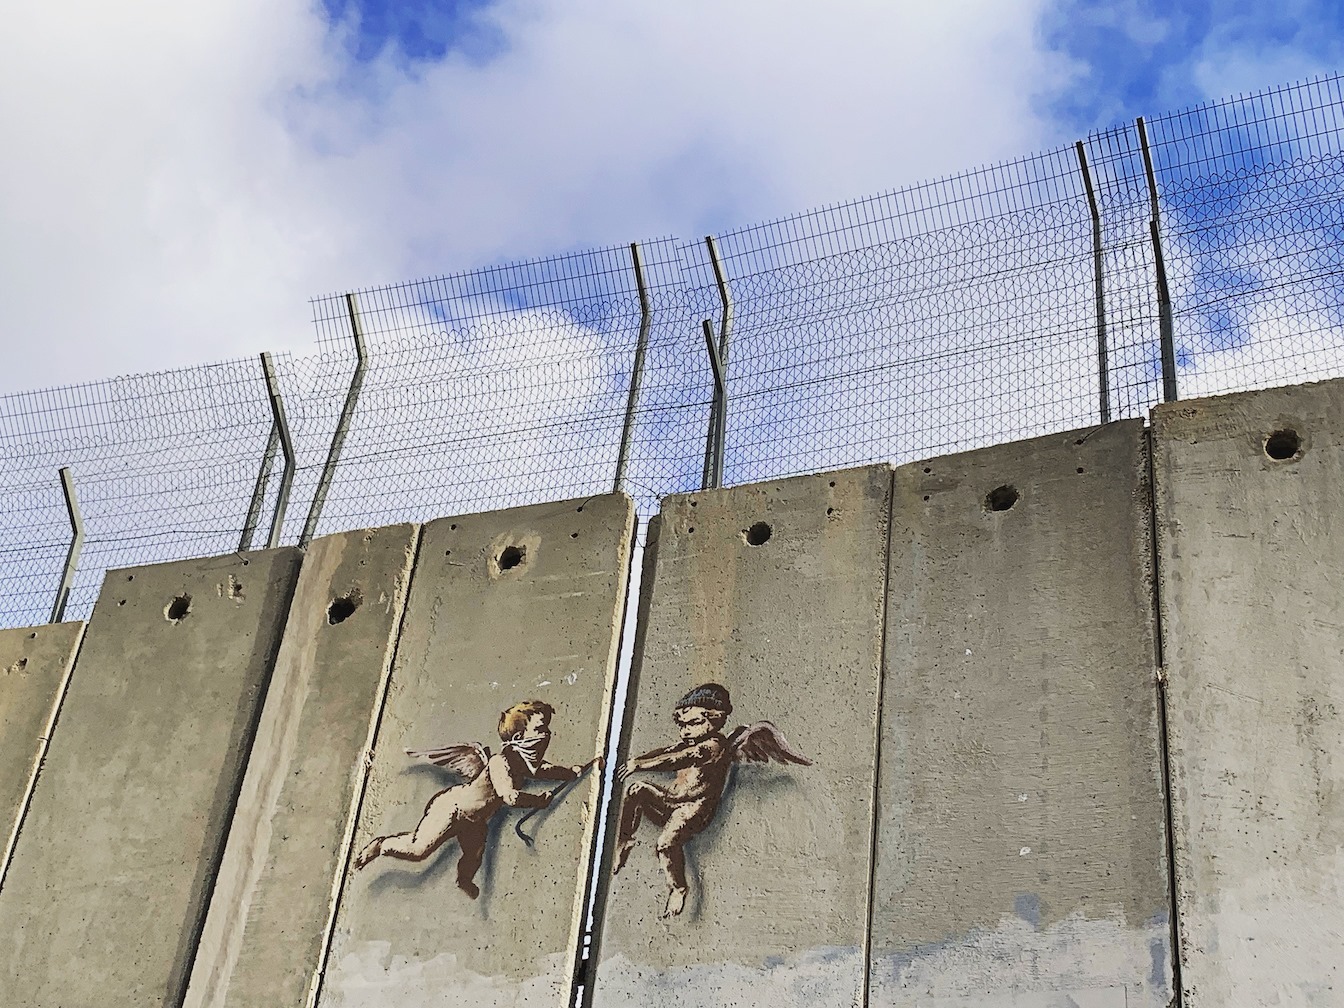 Angels break open the West Bank separation wall using a crowbar